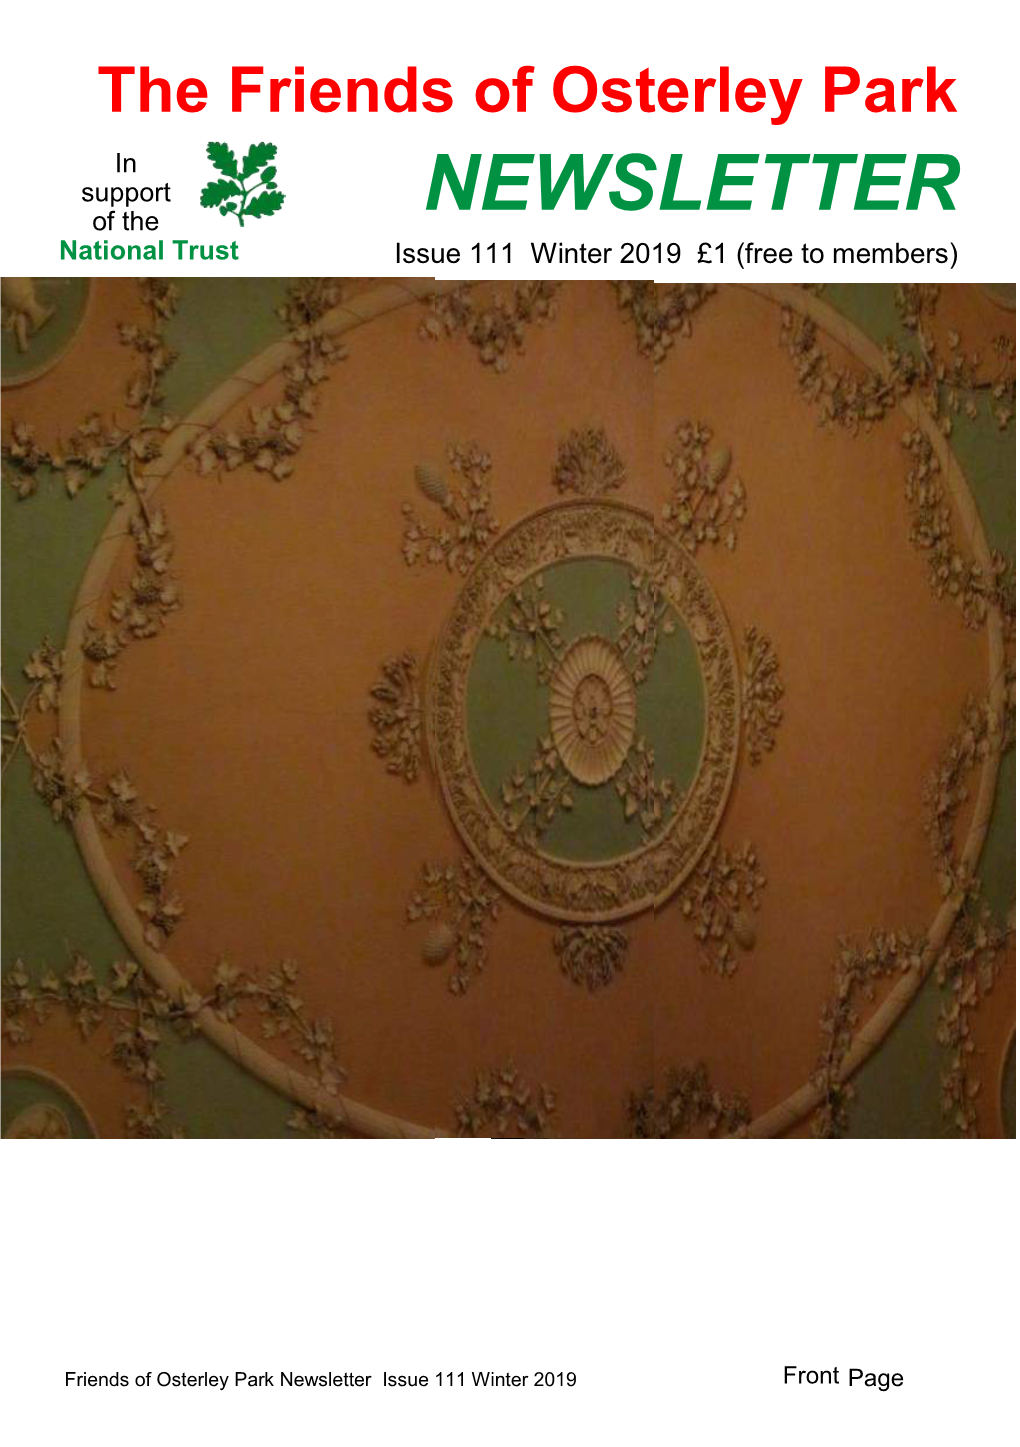 NEWSLETTER National Trust Issue 111 Winter 2019 £1 (Free to Members)